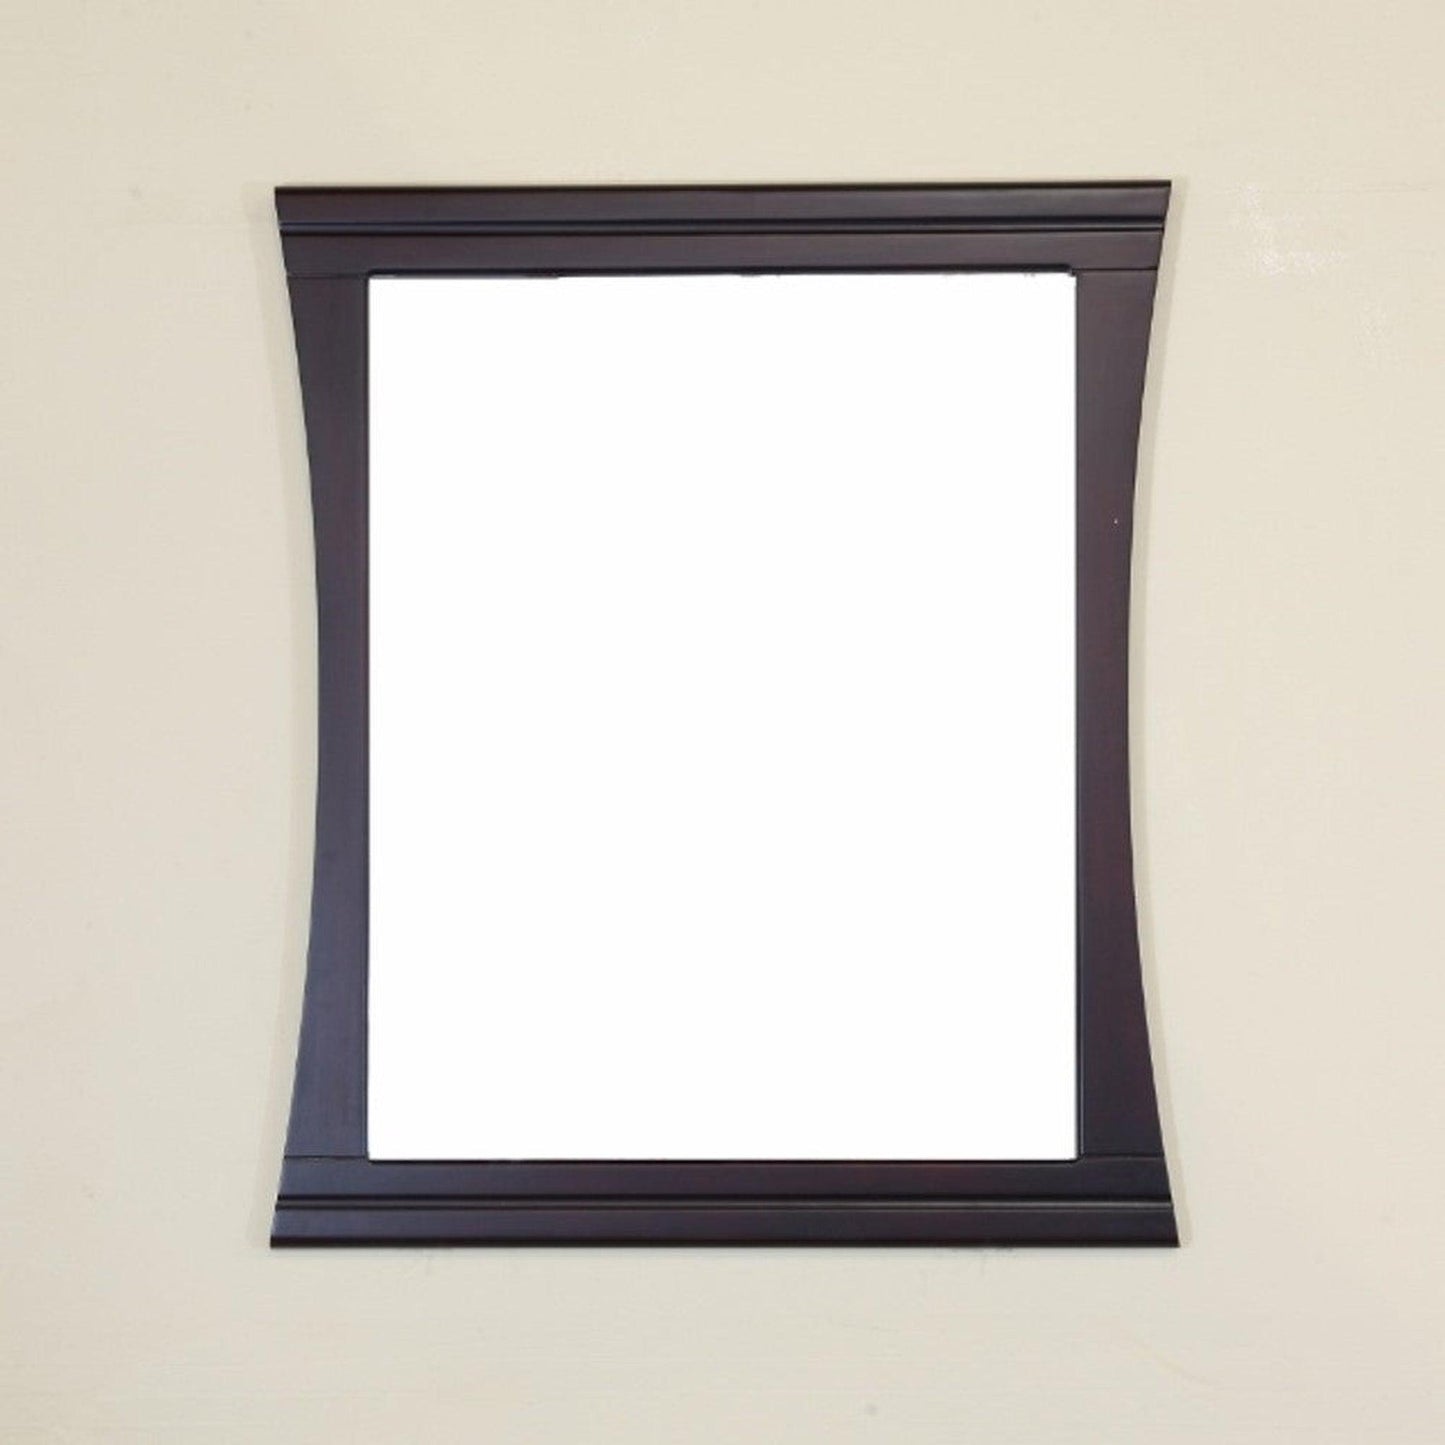 Bellaterra Home 30" x 35" Dark Mahogany Rectangle Wall-Mounted Solid Wood Framed Mirror Cabinet